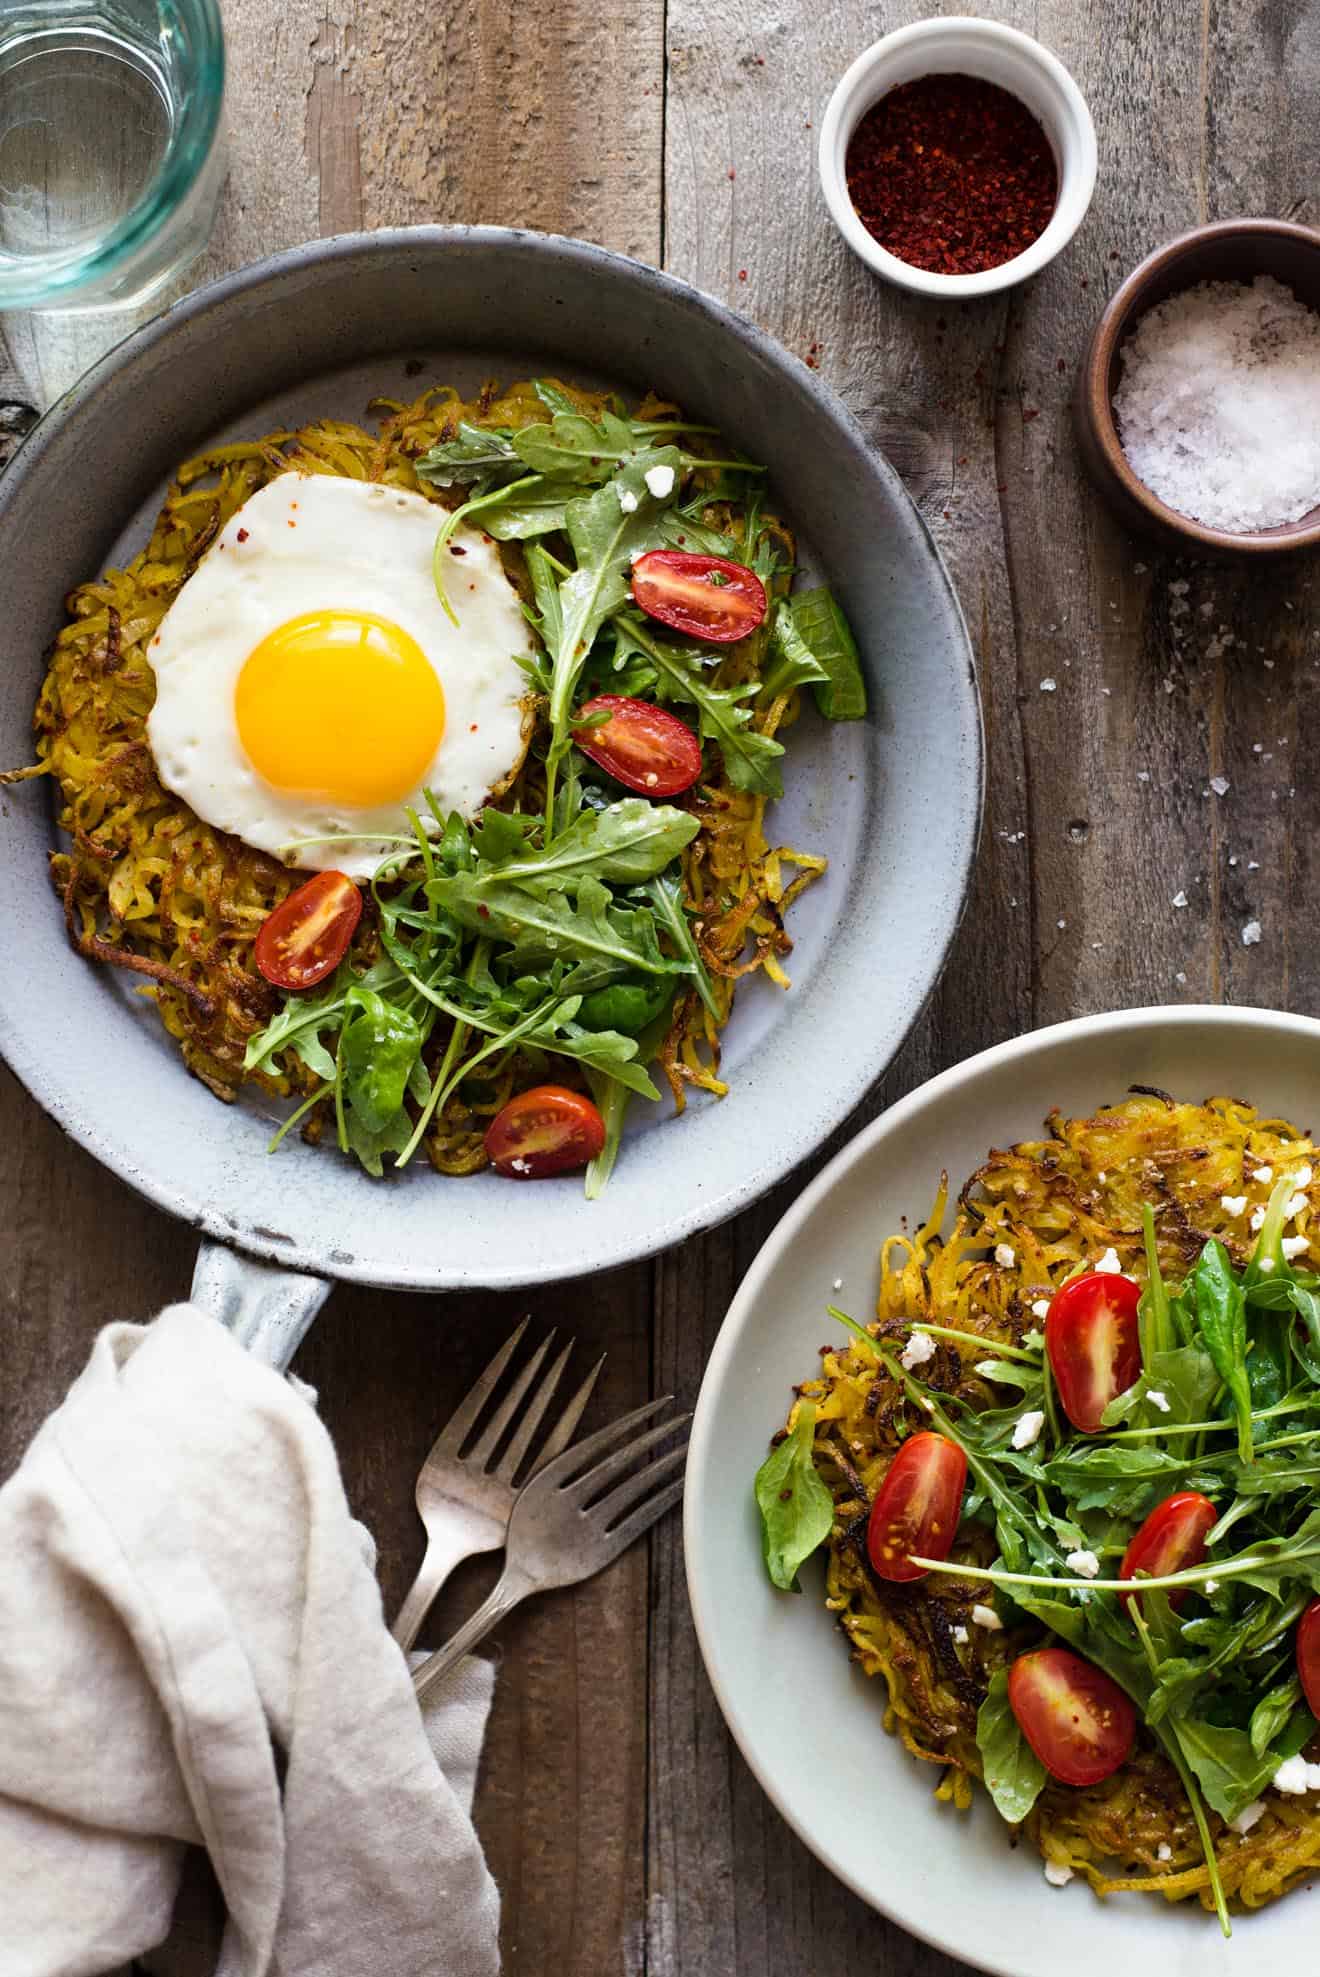 Curried Rosti - simple pan-fried potato pancake that's great as a healthy breakfast!